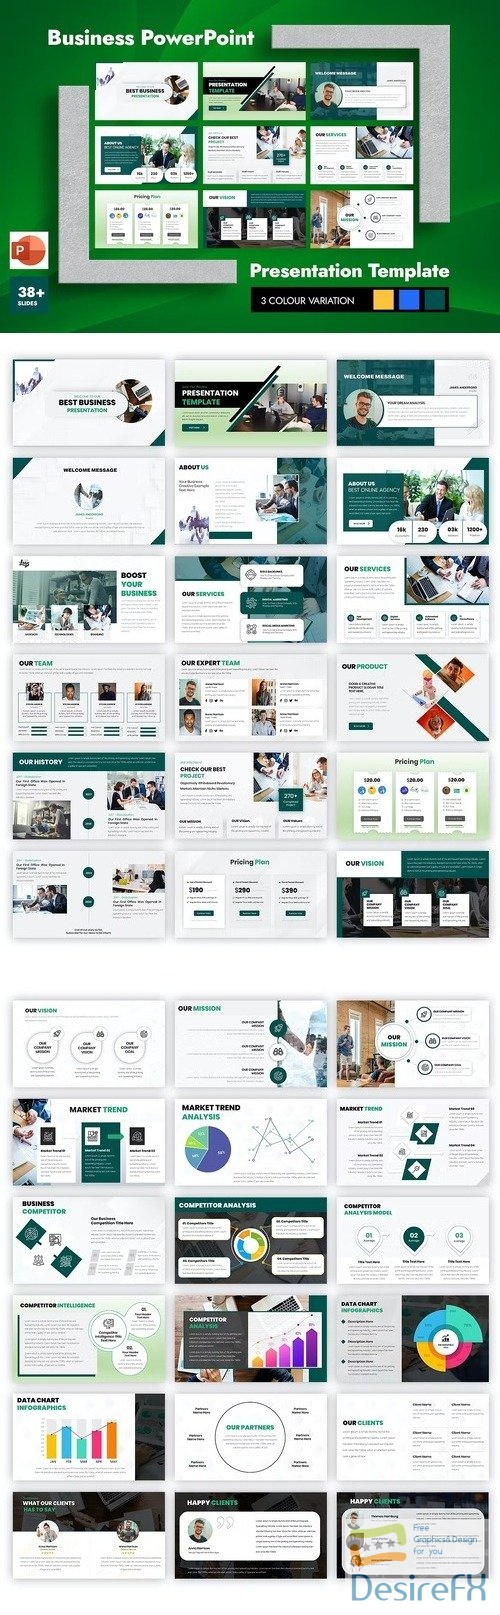 About Company PowerPoint Presentation Template